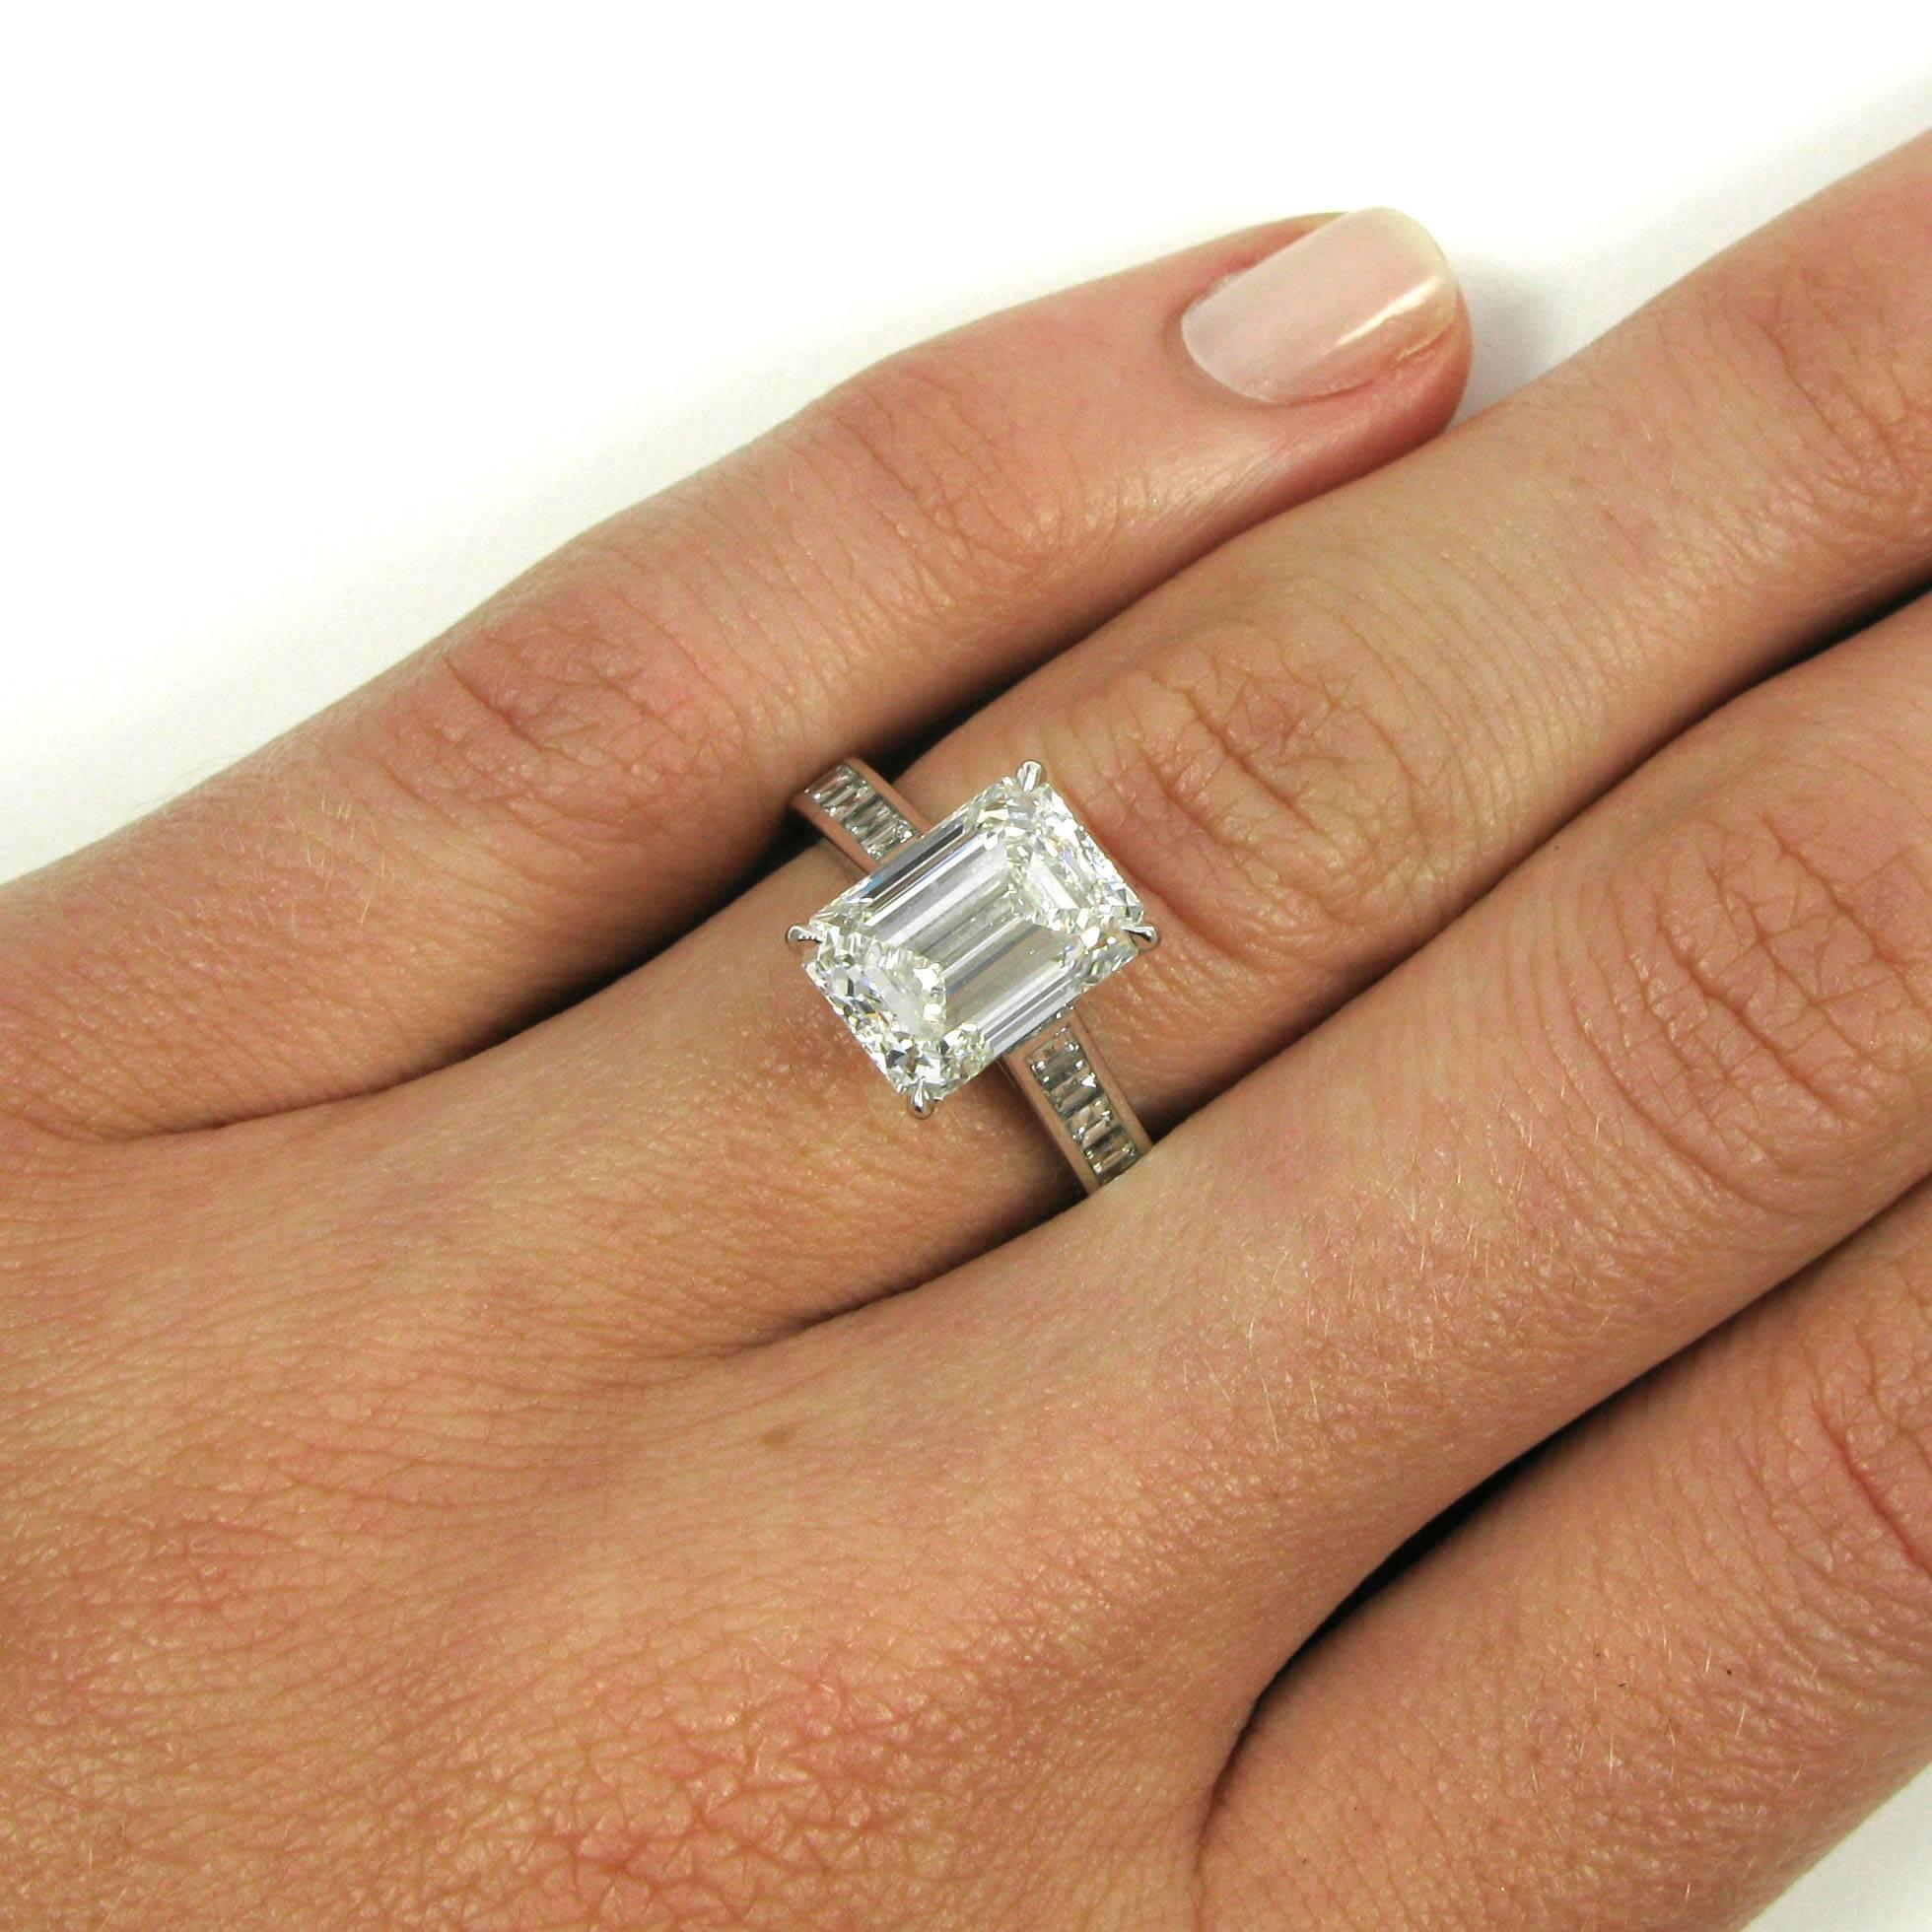 Subtle sparkle! This elegant platinum ring features a 4.01 carat emerald-cut diamond with G color and VS2 clarity set atop a simple cathedral ring by J Birnbach with 20 square cut diamonds totaling 1.08 carat set in the shank.

Purchase includes GIA